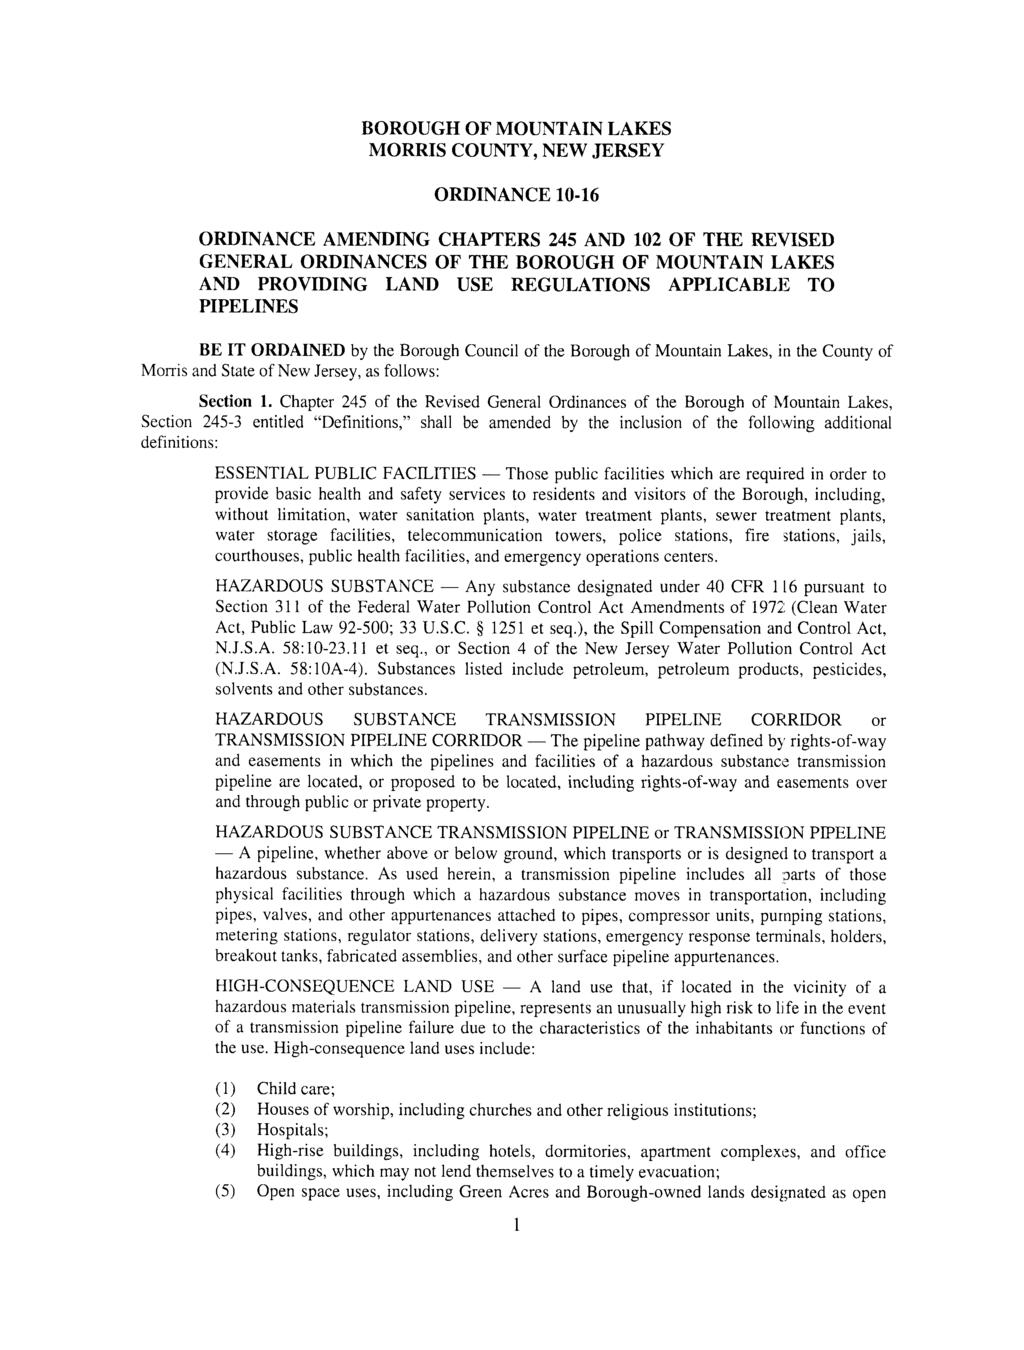 BOROUGH OF MOUNTAIN LAKES MORRIS COUNTY, NEW JERSEY ORDINANCE 10-16 ORDINANCE AMENDING CHAPTERS 245 AND 102 OF THE REVISED GENERAL ORDINANCES OF THE BOROUGH OF MOUNTAIN LAKES AND PROVIDING LAND USE